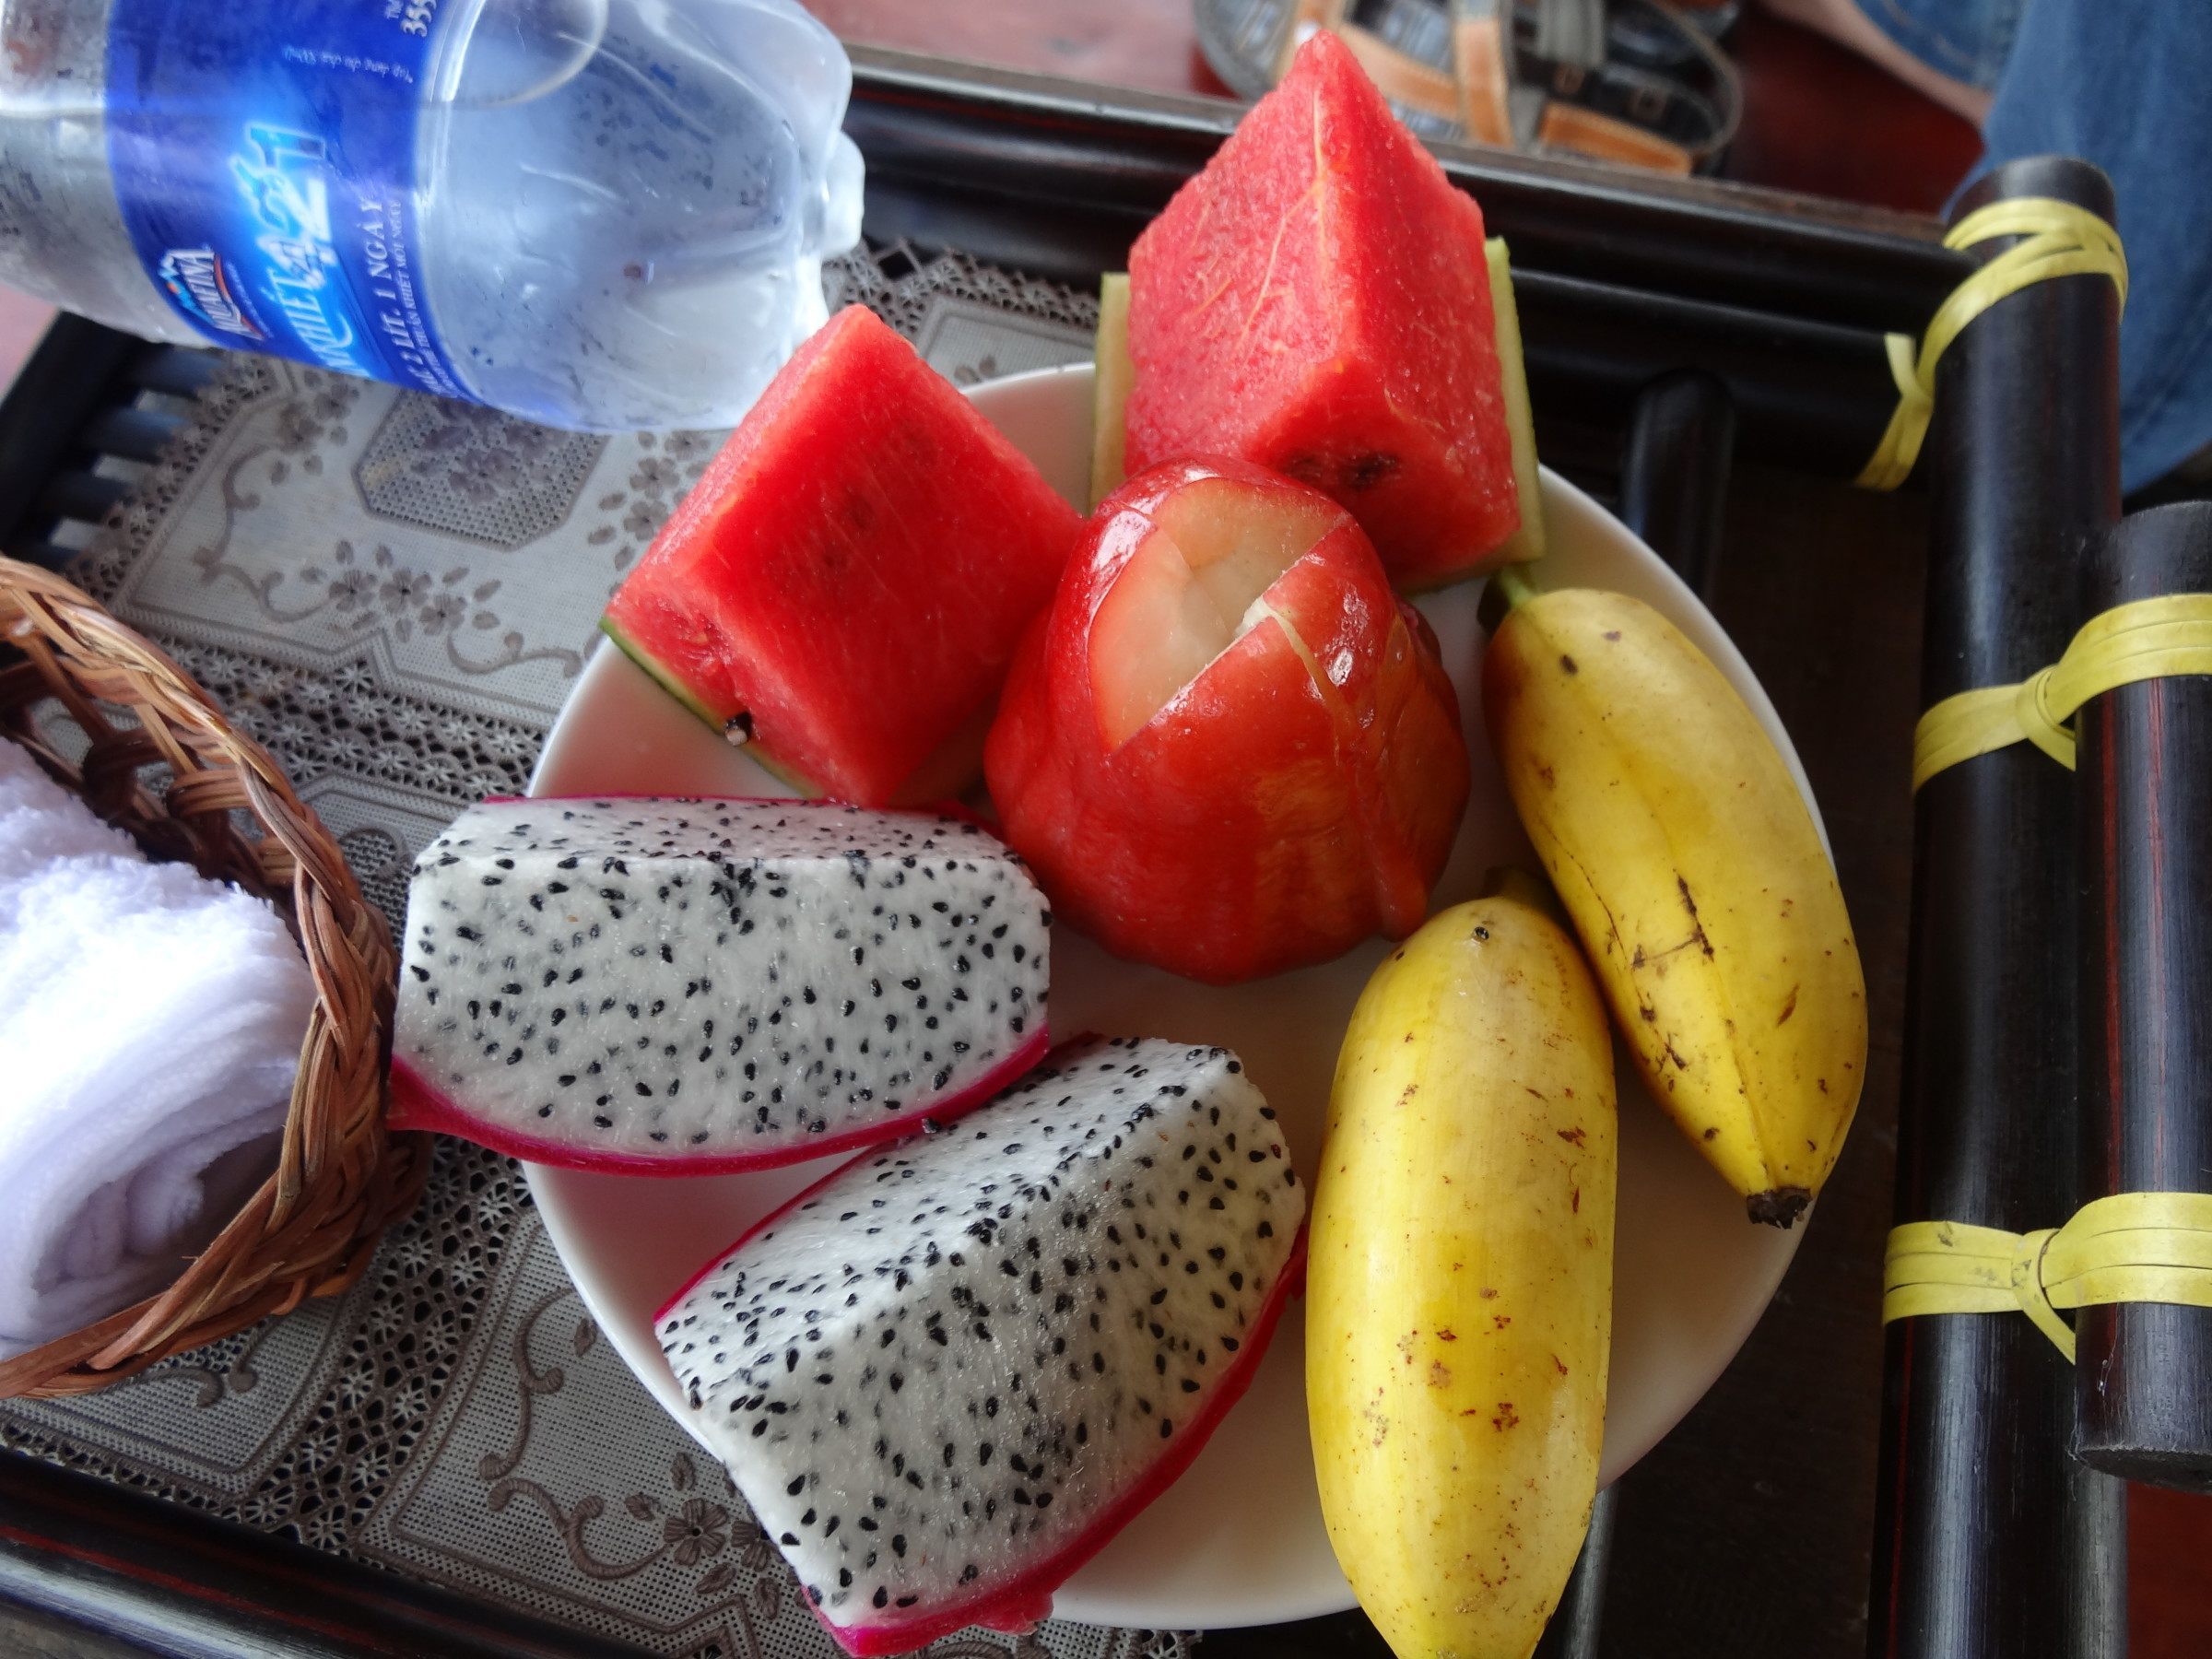 Dragonfruit, Lady Finger Bananas, Rose Apples and Watermelon